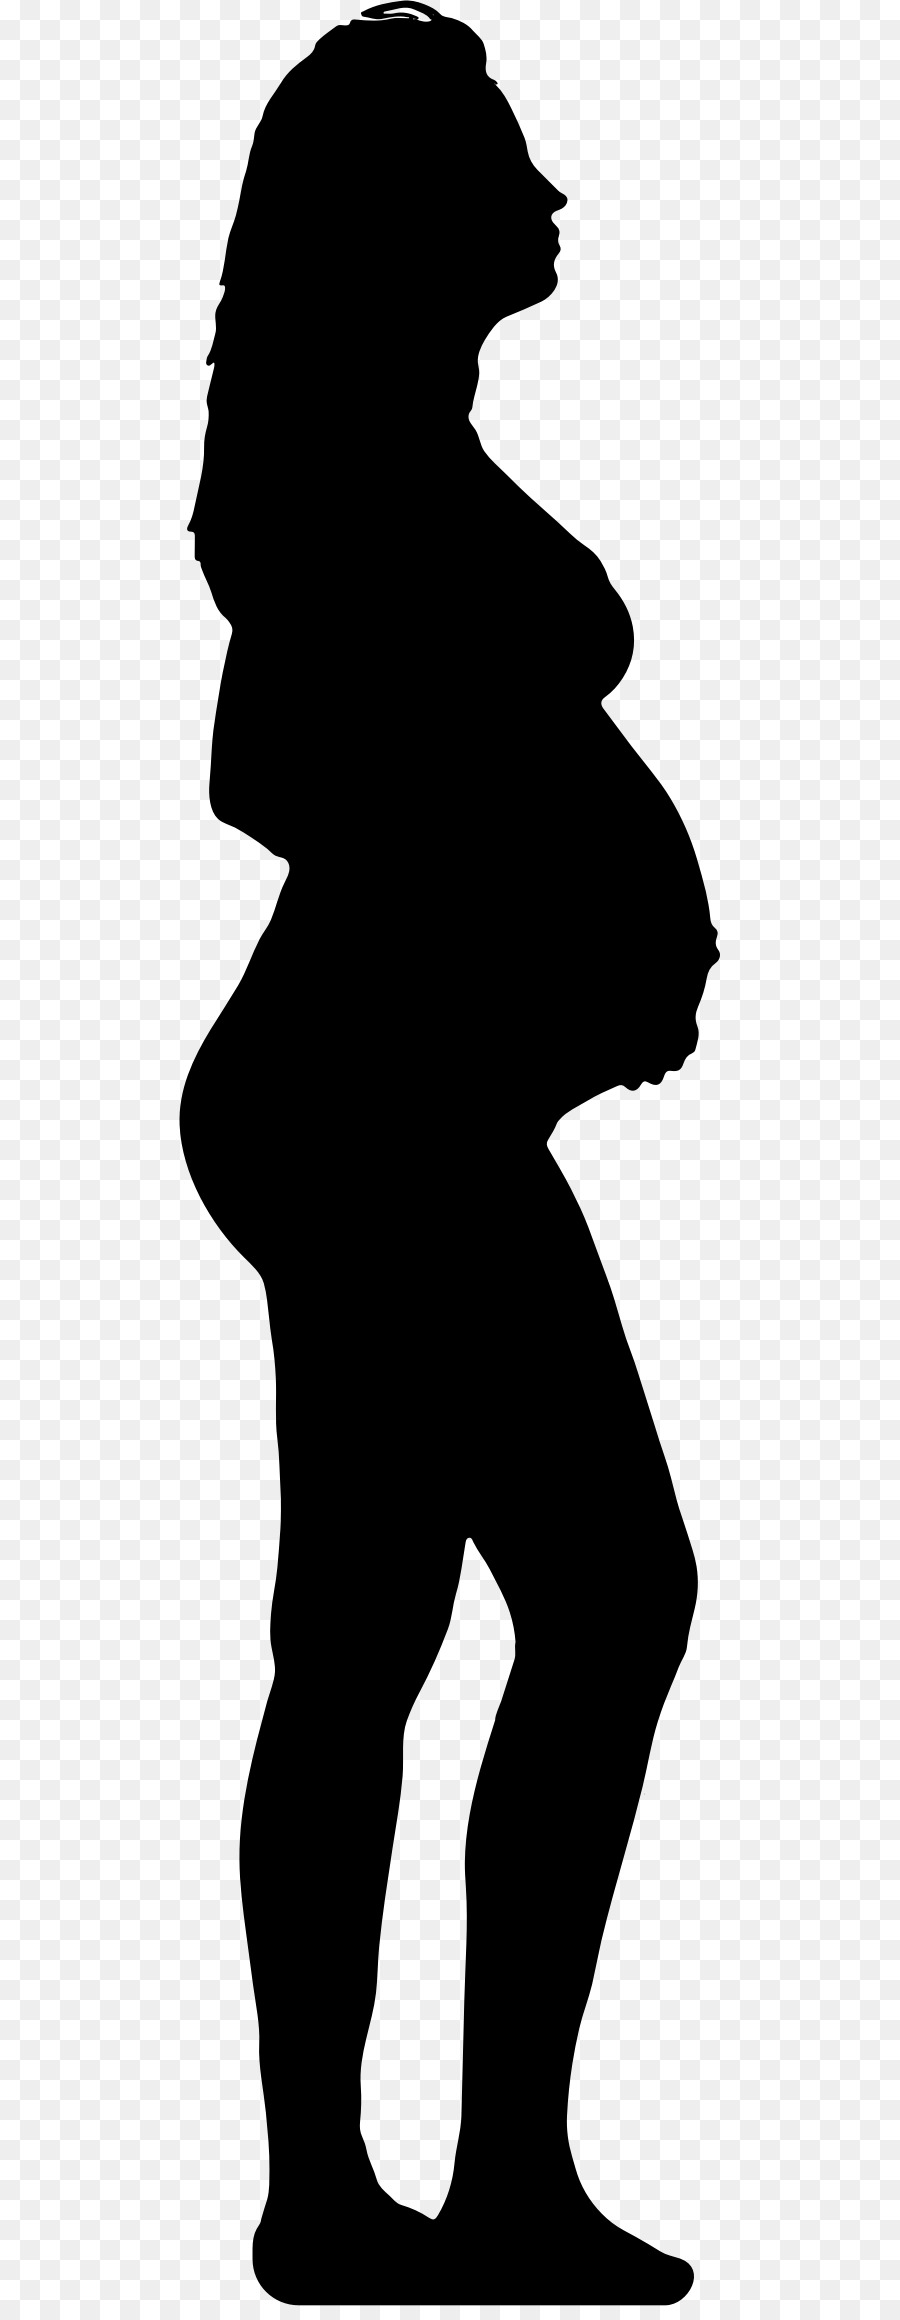 Silhouette Pregnancy Woman Clip art - pregnant png download - 542*2306 - Free Transparent Silhouette png Download.